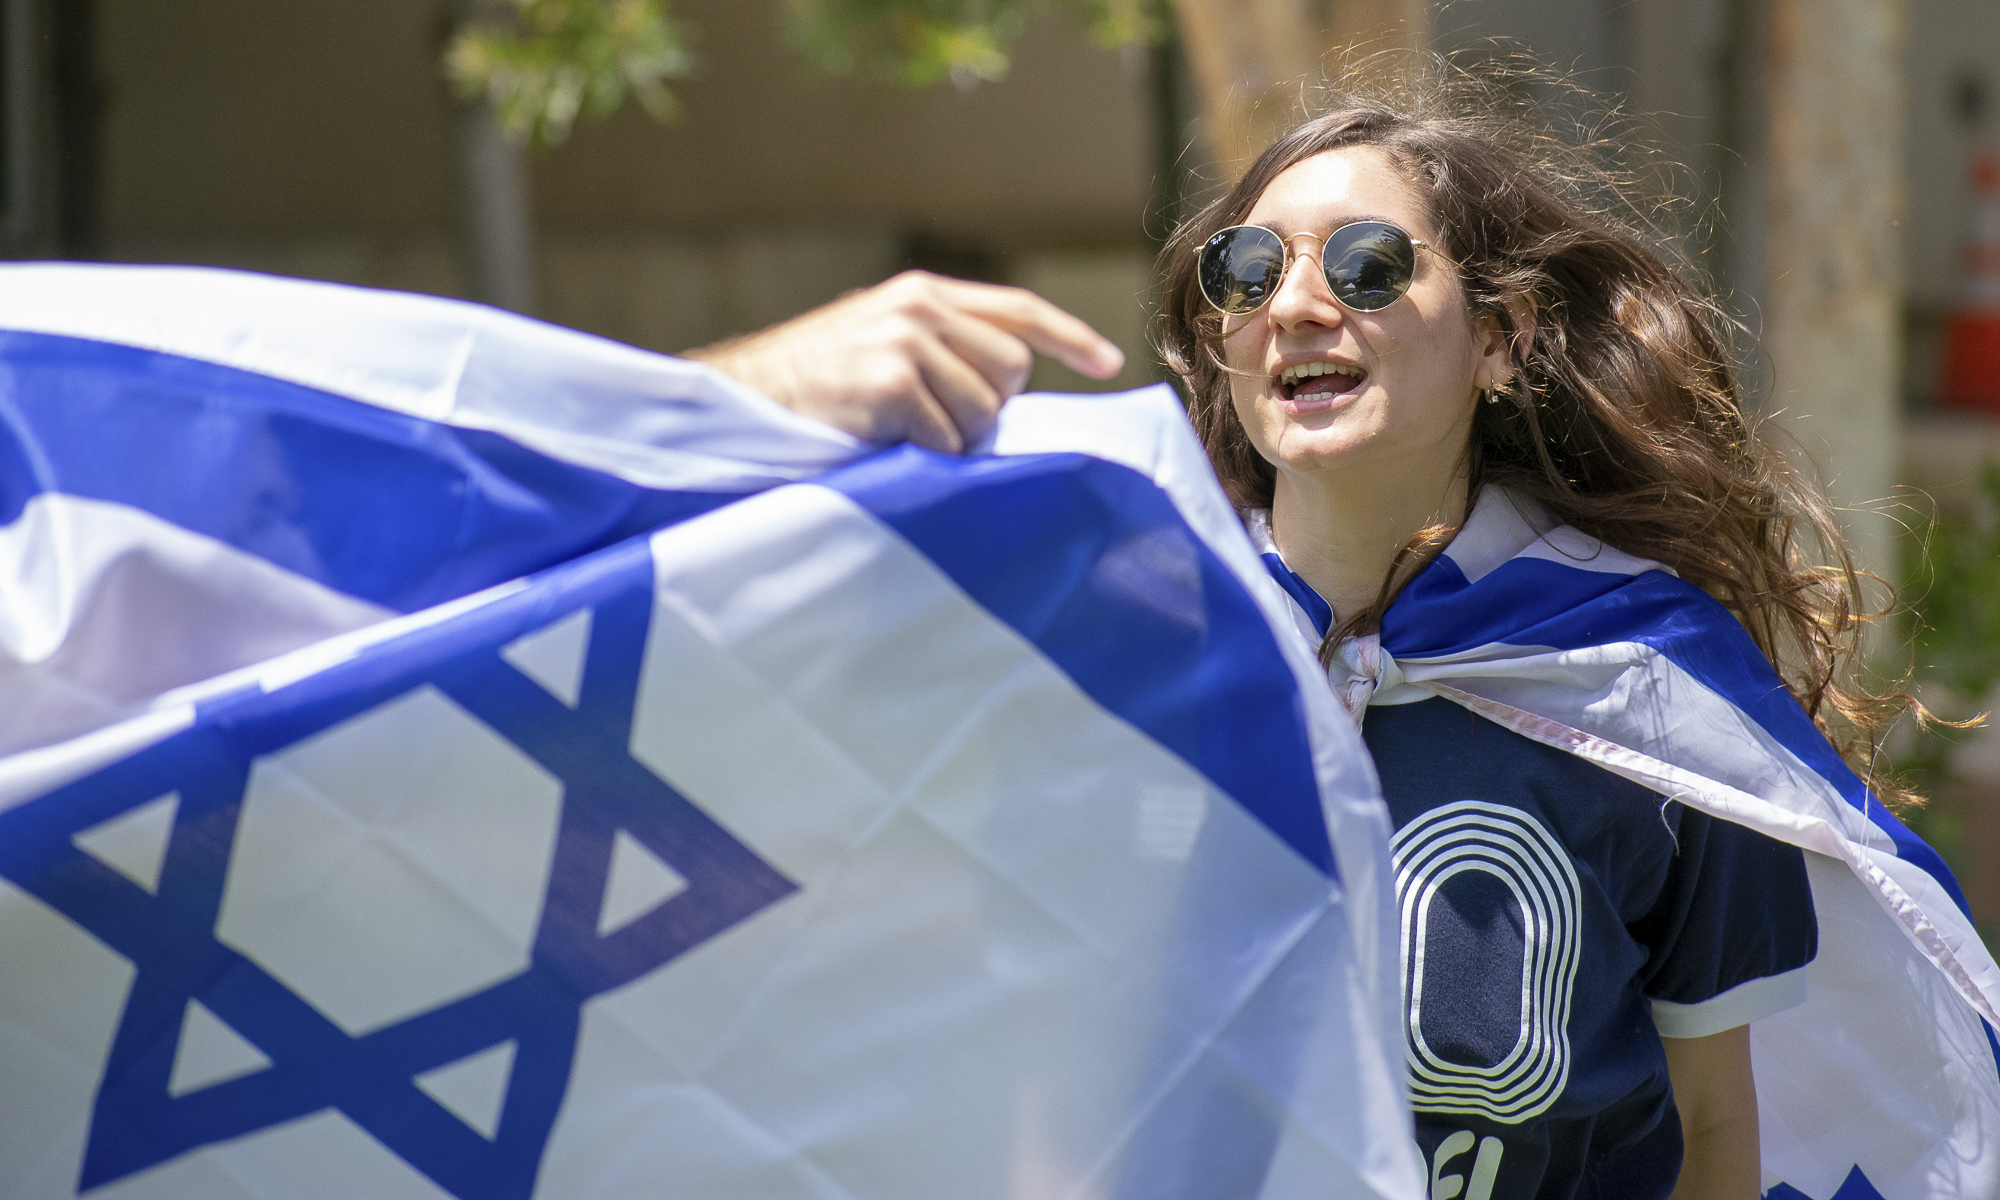  Shir Atias, an international student From Israel dances to Israeli music during an event put on by the Students Supporting Israel club at the college on Thursday, May 10 in Santa Monica, California. The event was a celebration for the 70th anniversa